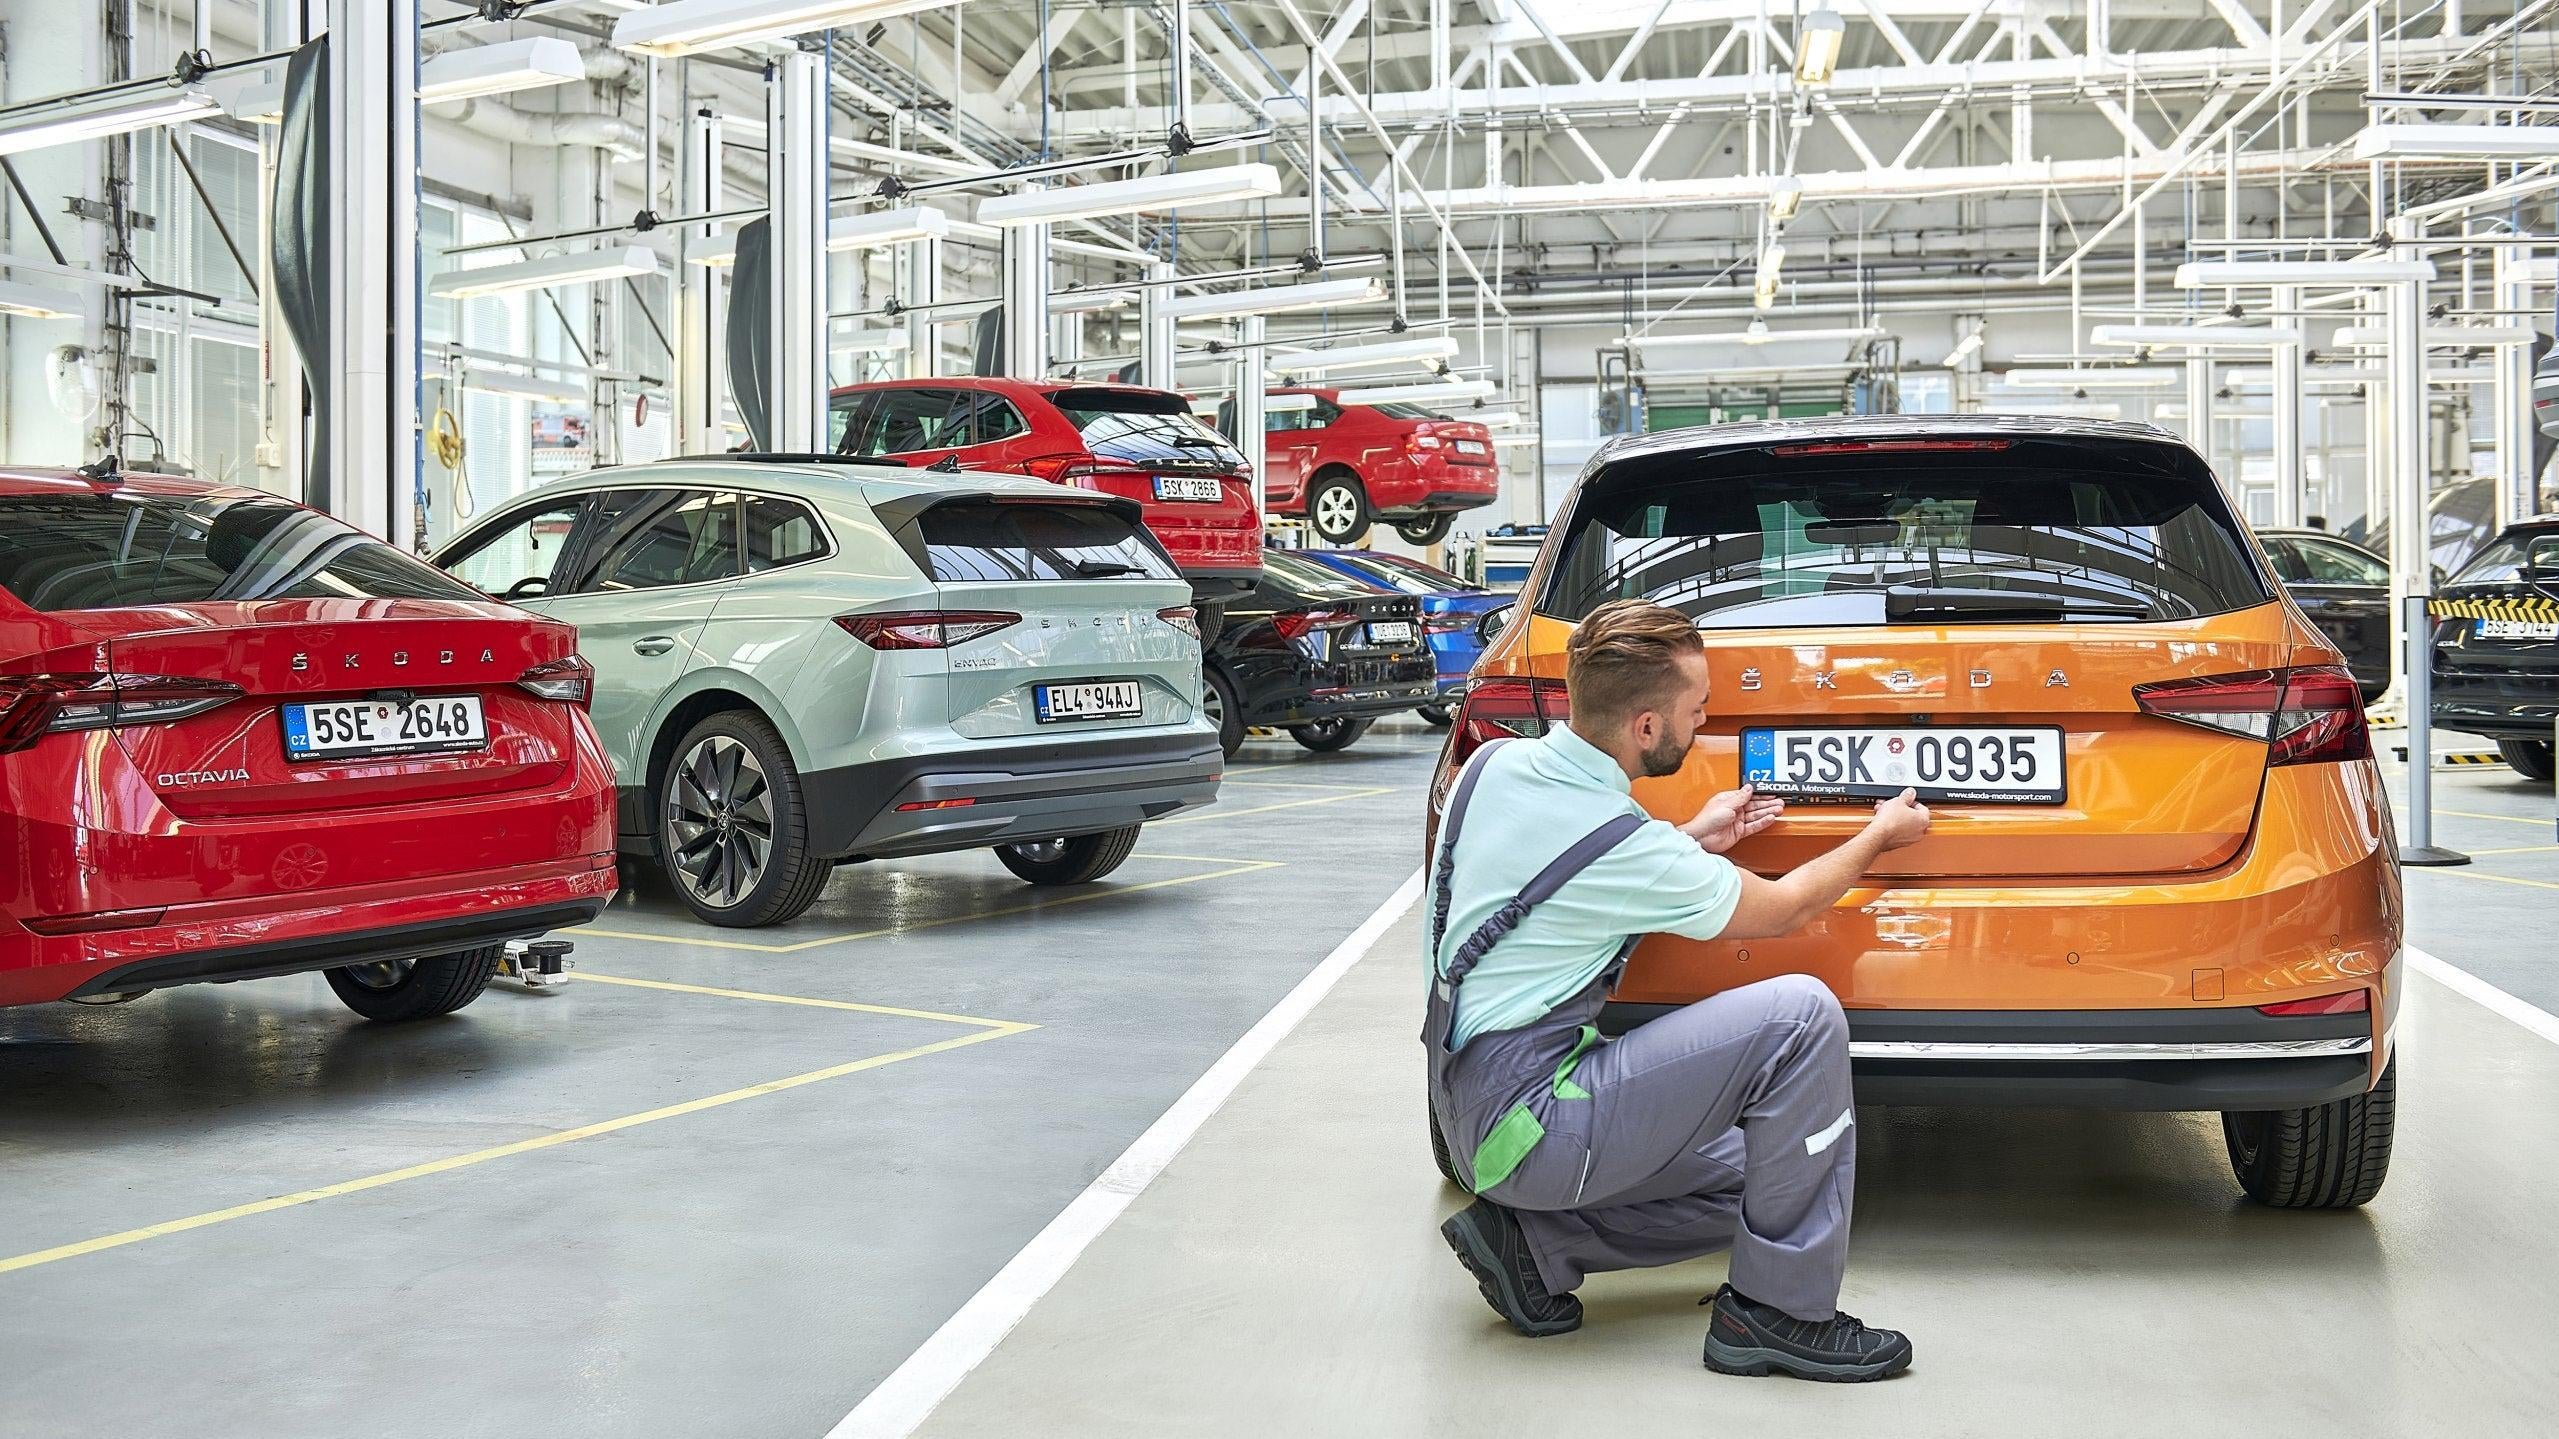 Škoda Says Mileage Won’t Affect Maintenance And Service Intervals When Electric Cars Take Over